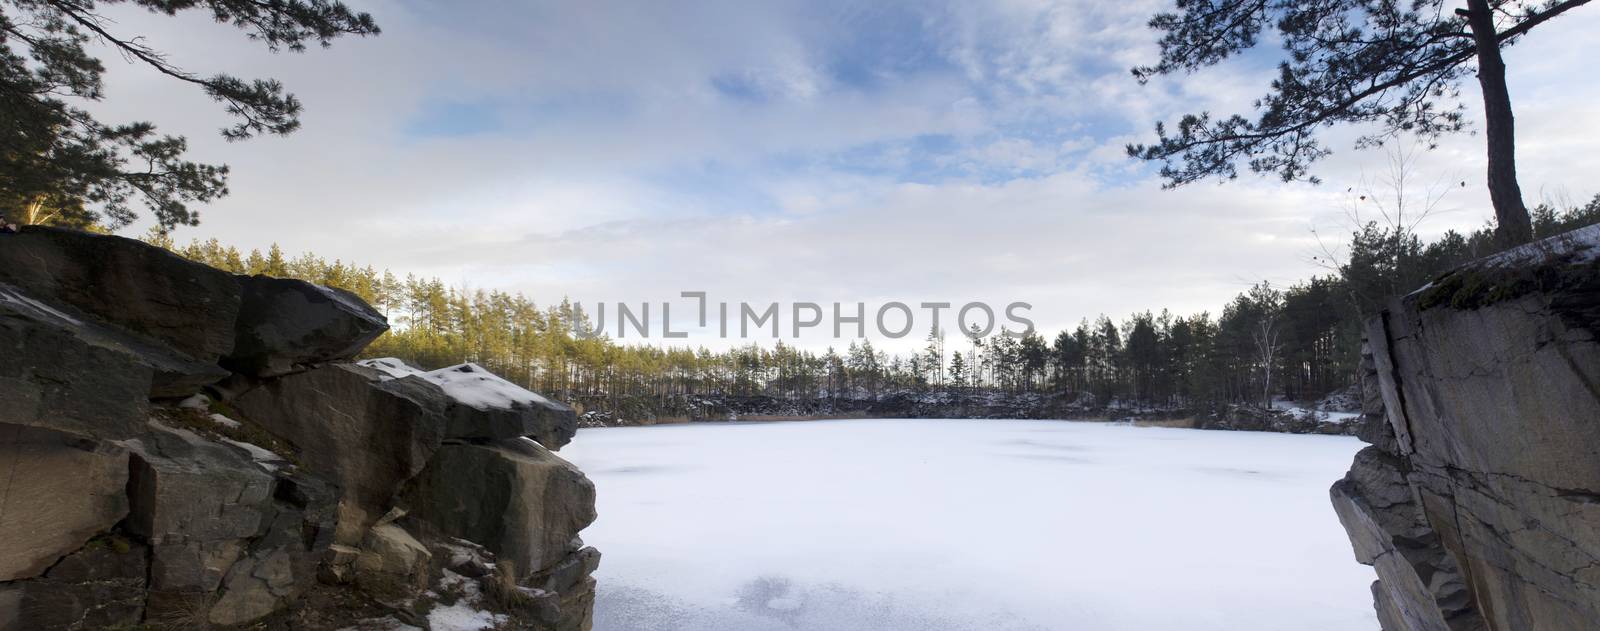 Panorama of an abandoned stone pit in winter  by dolnikow